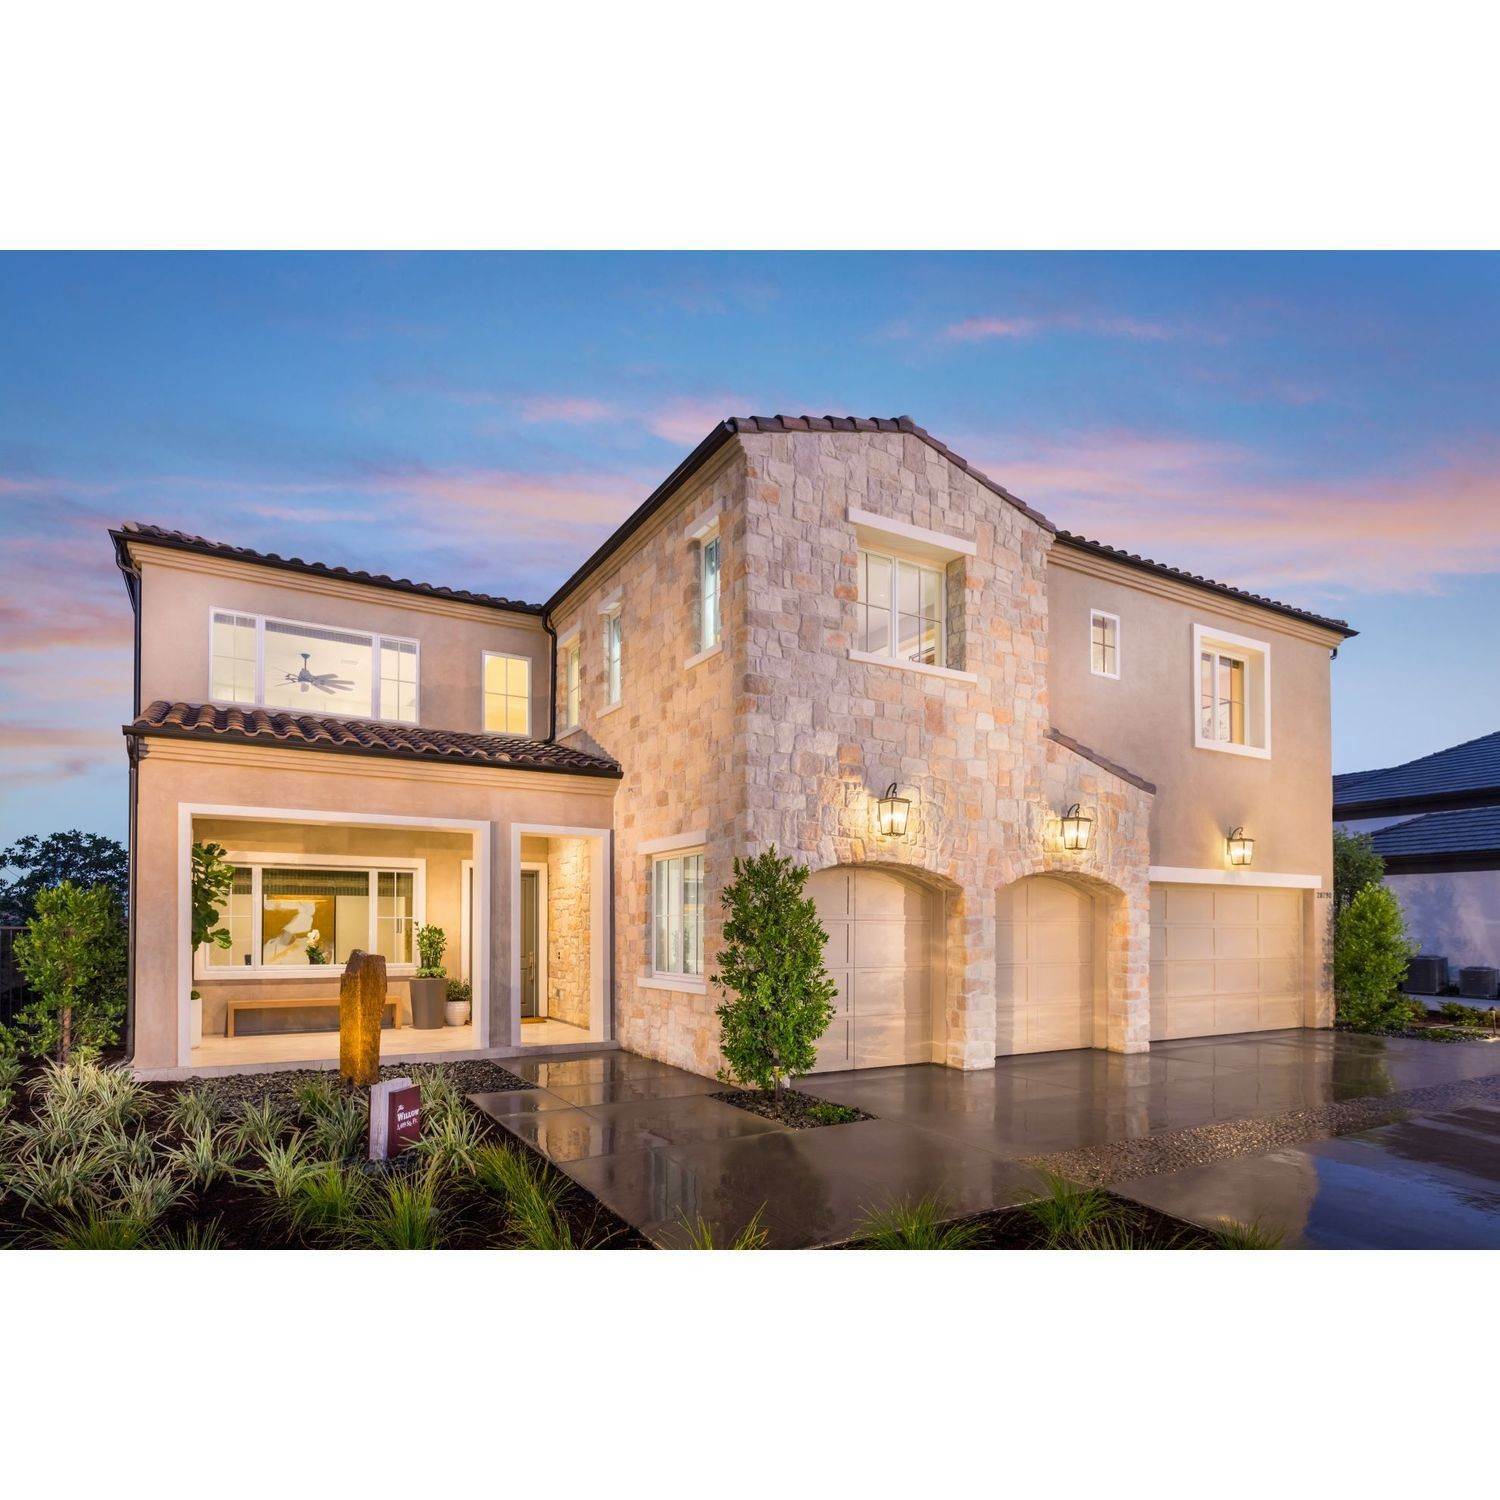 Single Family for Sale at Viewpoint At Saddle Crest - The Willow Residence 28790 Hidden Trl SILVERADO, CALIFORNIA 92676 UNITED STATES